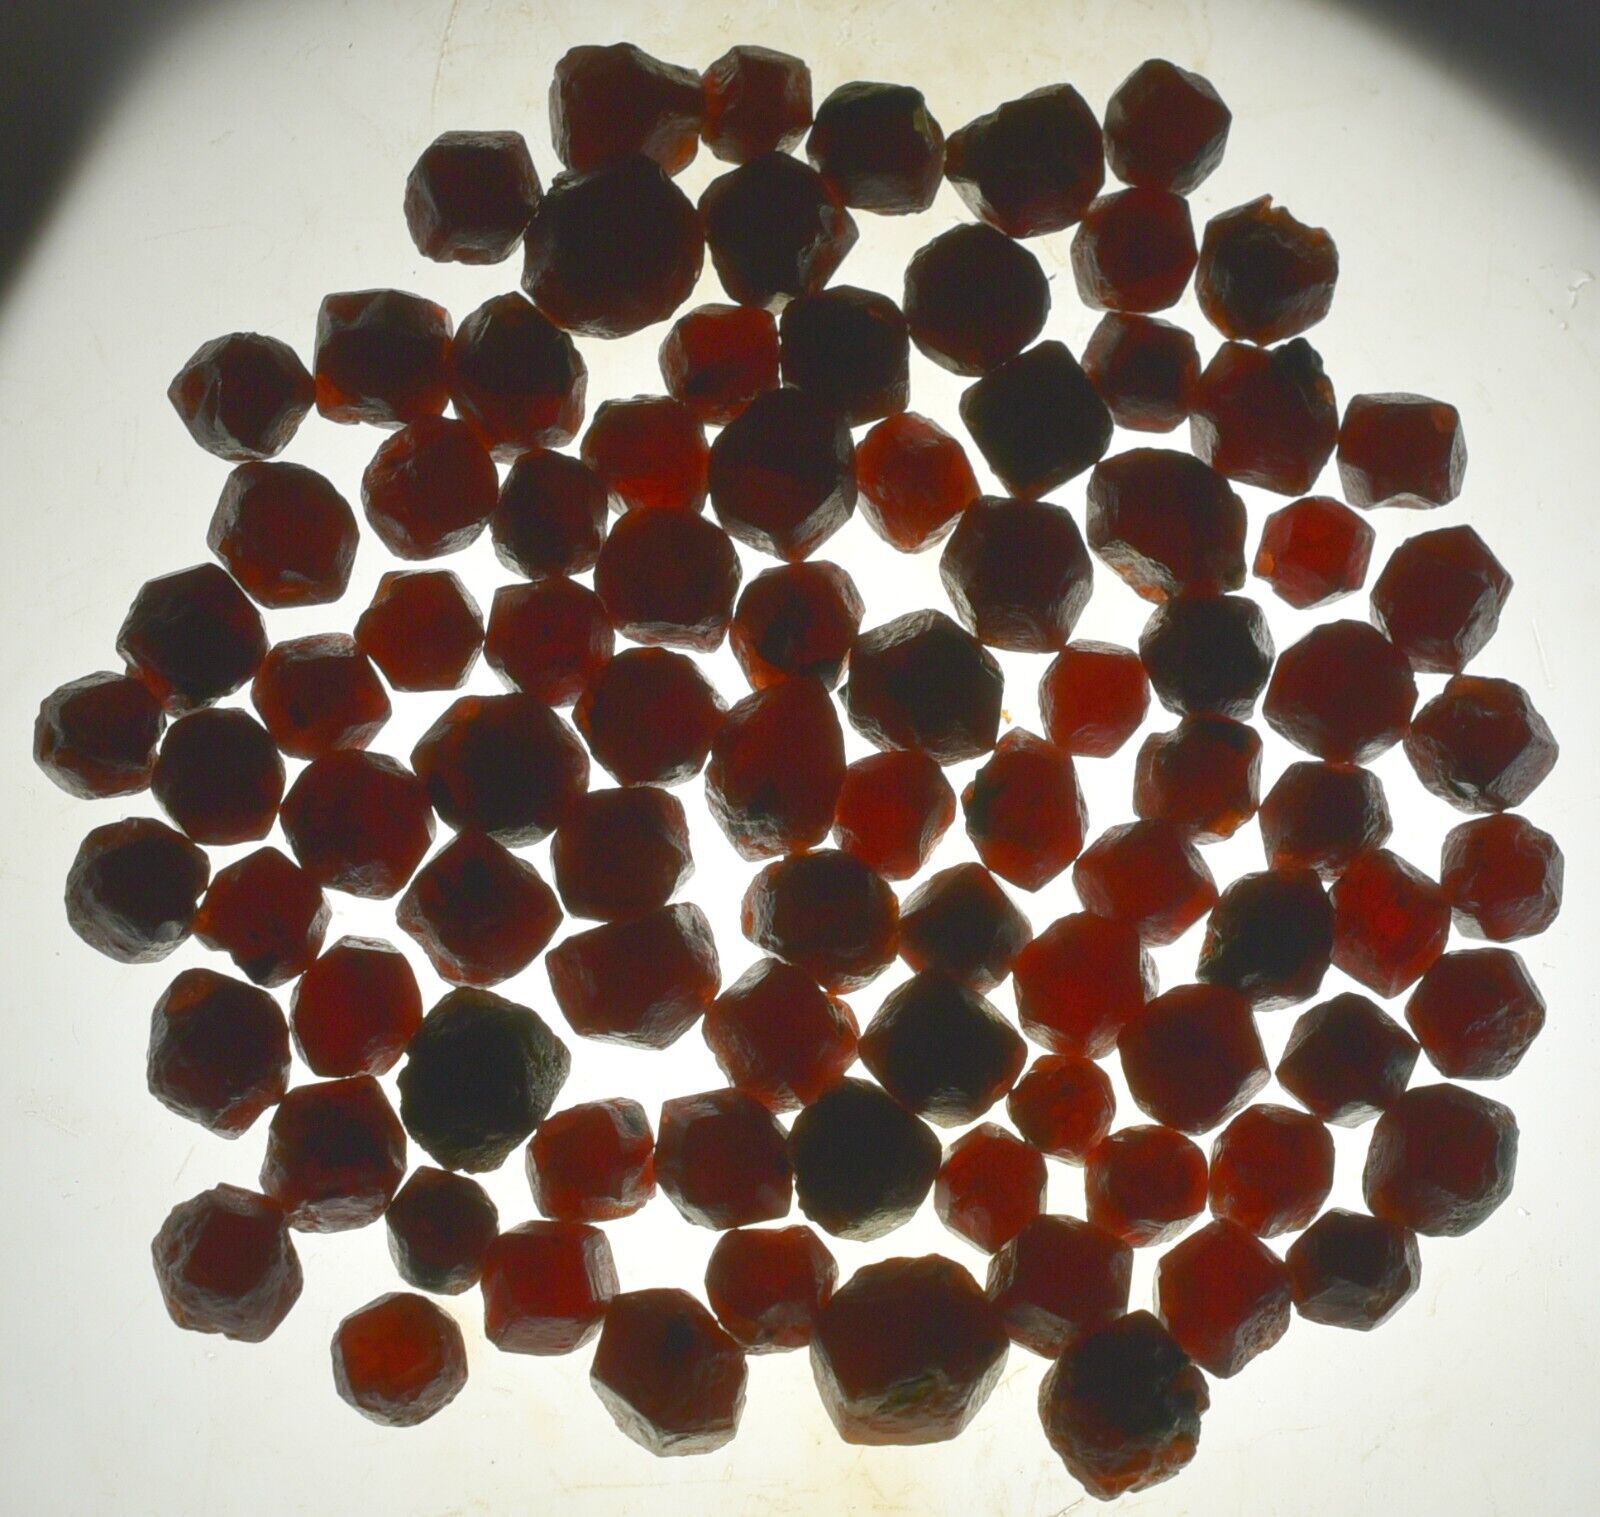 500GM Full Terminated Natural Red Almandine Garnet Crystals Lot From Afghanistan